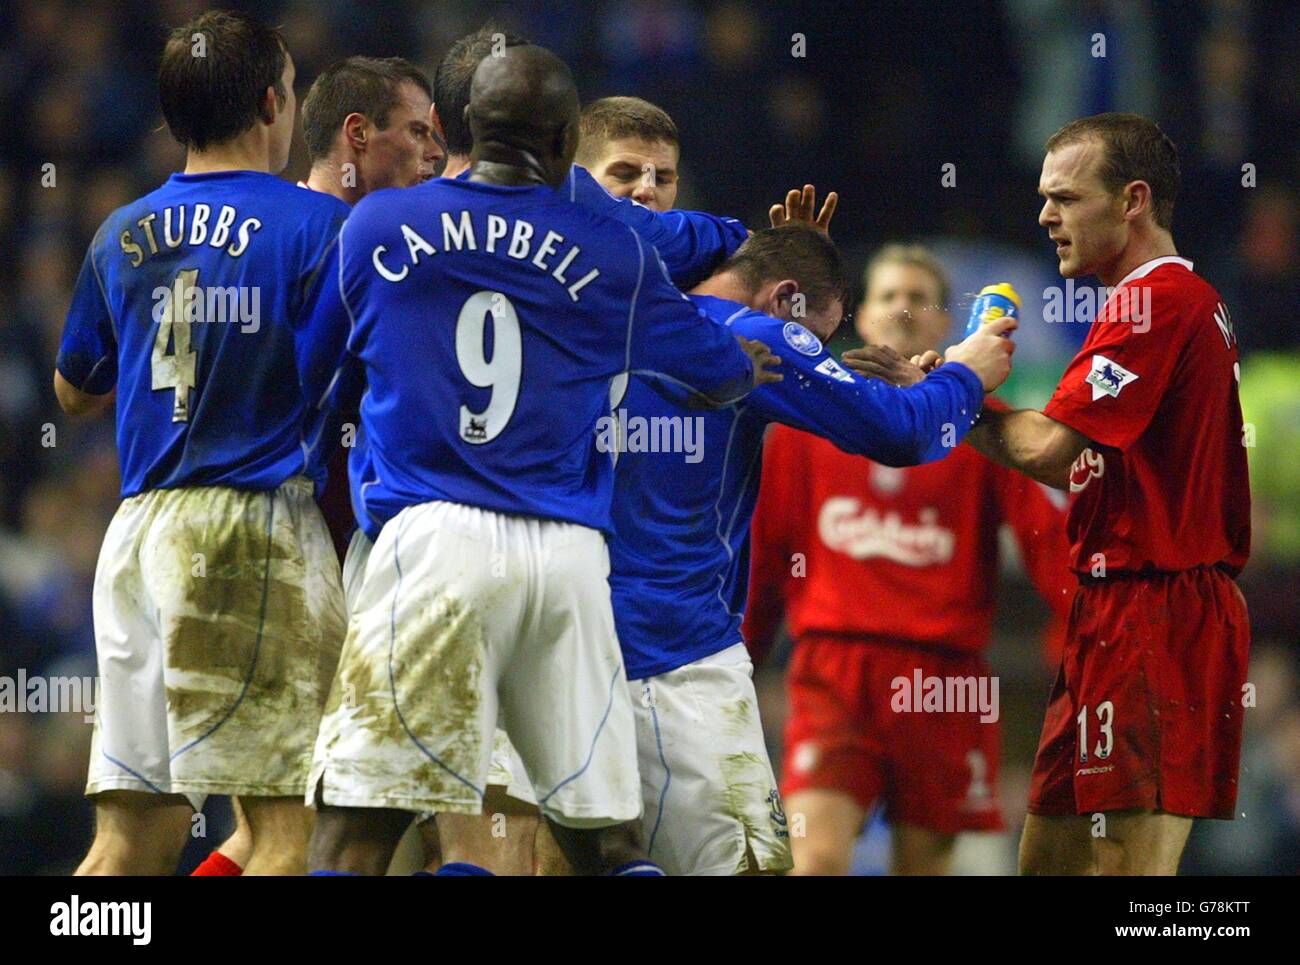 Liverpool's Steven Gerrard (centre) scuffles with Everton's Wayne Rooney (centre right) as team-mates arrive to separate the two, during their FA Barclaycard Premiership match at Anfield, Liverpool. Liverpool drew 0-0 with Everton. Stock Photo